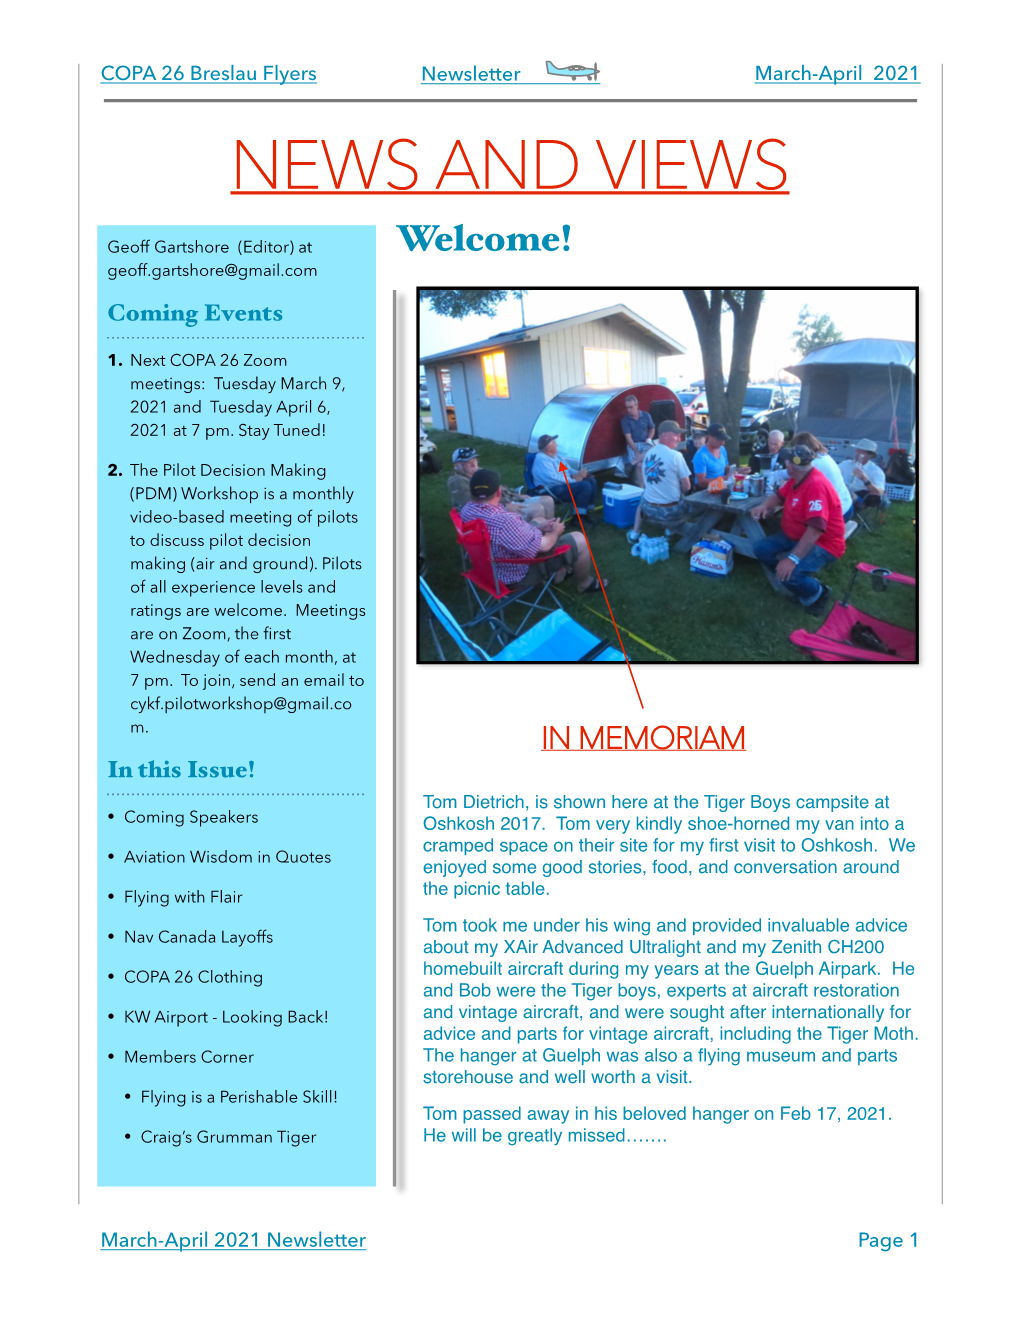 COPA 26 Newsletter March-April 2021 Final for Distribution